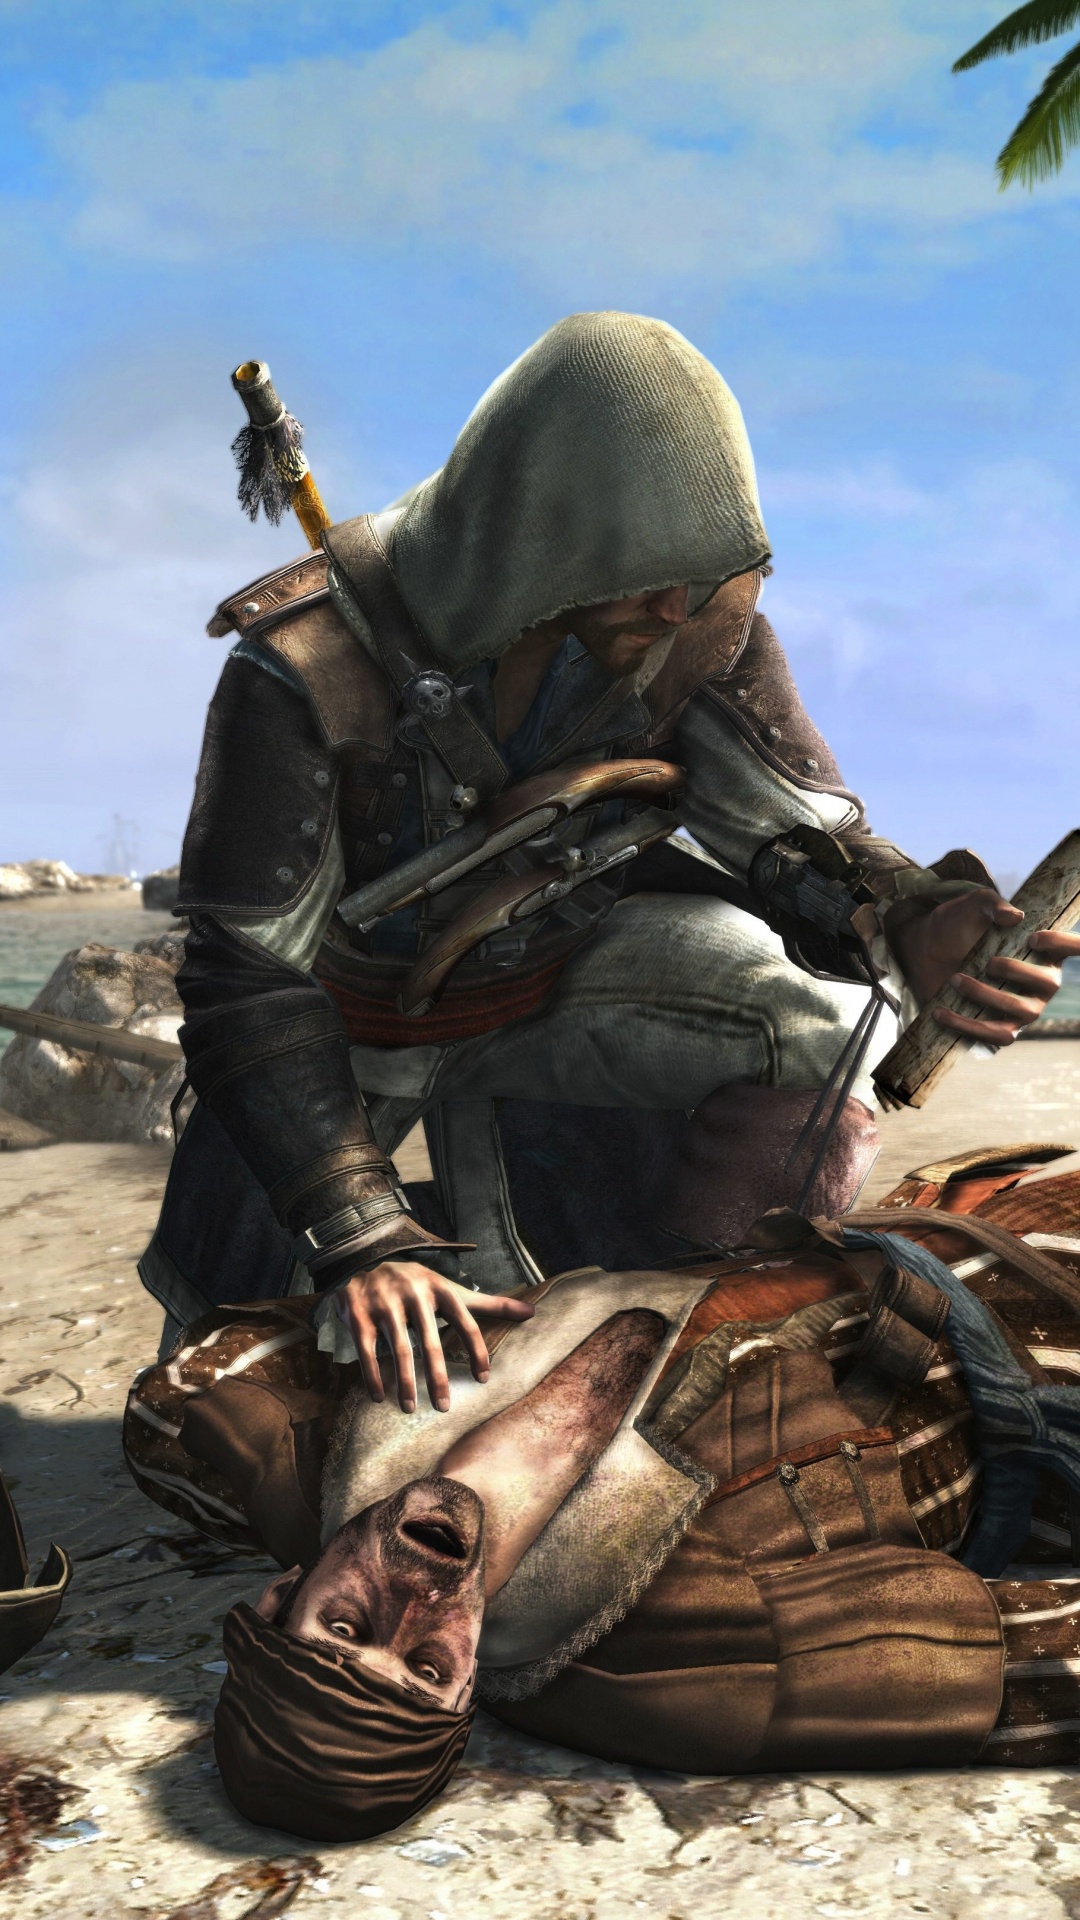 Assassins Creed III, Ubisoft, Edward Kenway, pc Game, Soldier. Wallpaper in 1080x1920 Resolution